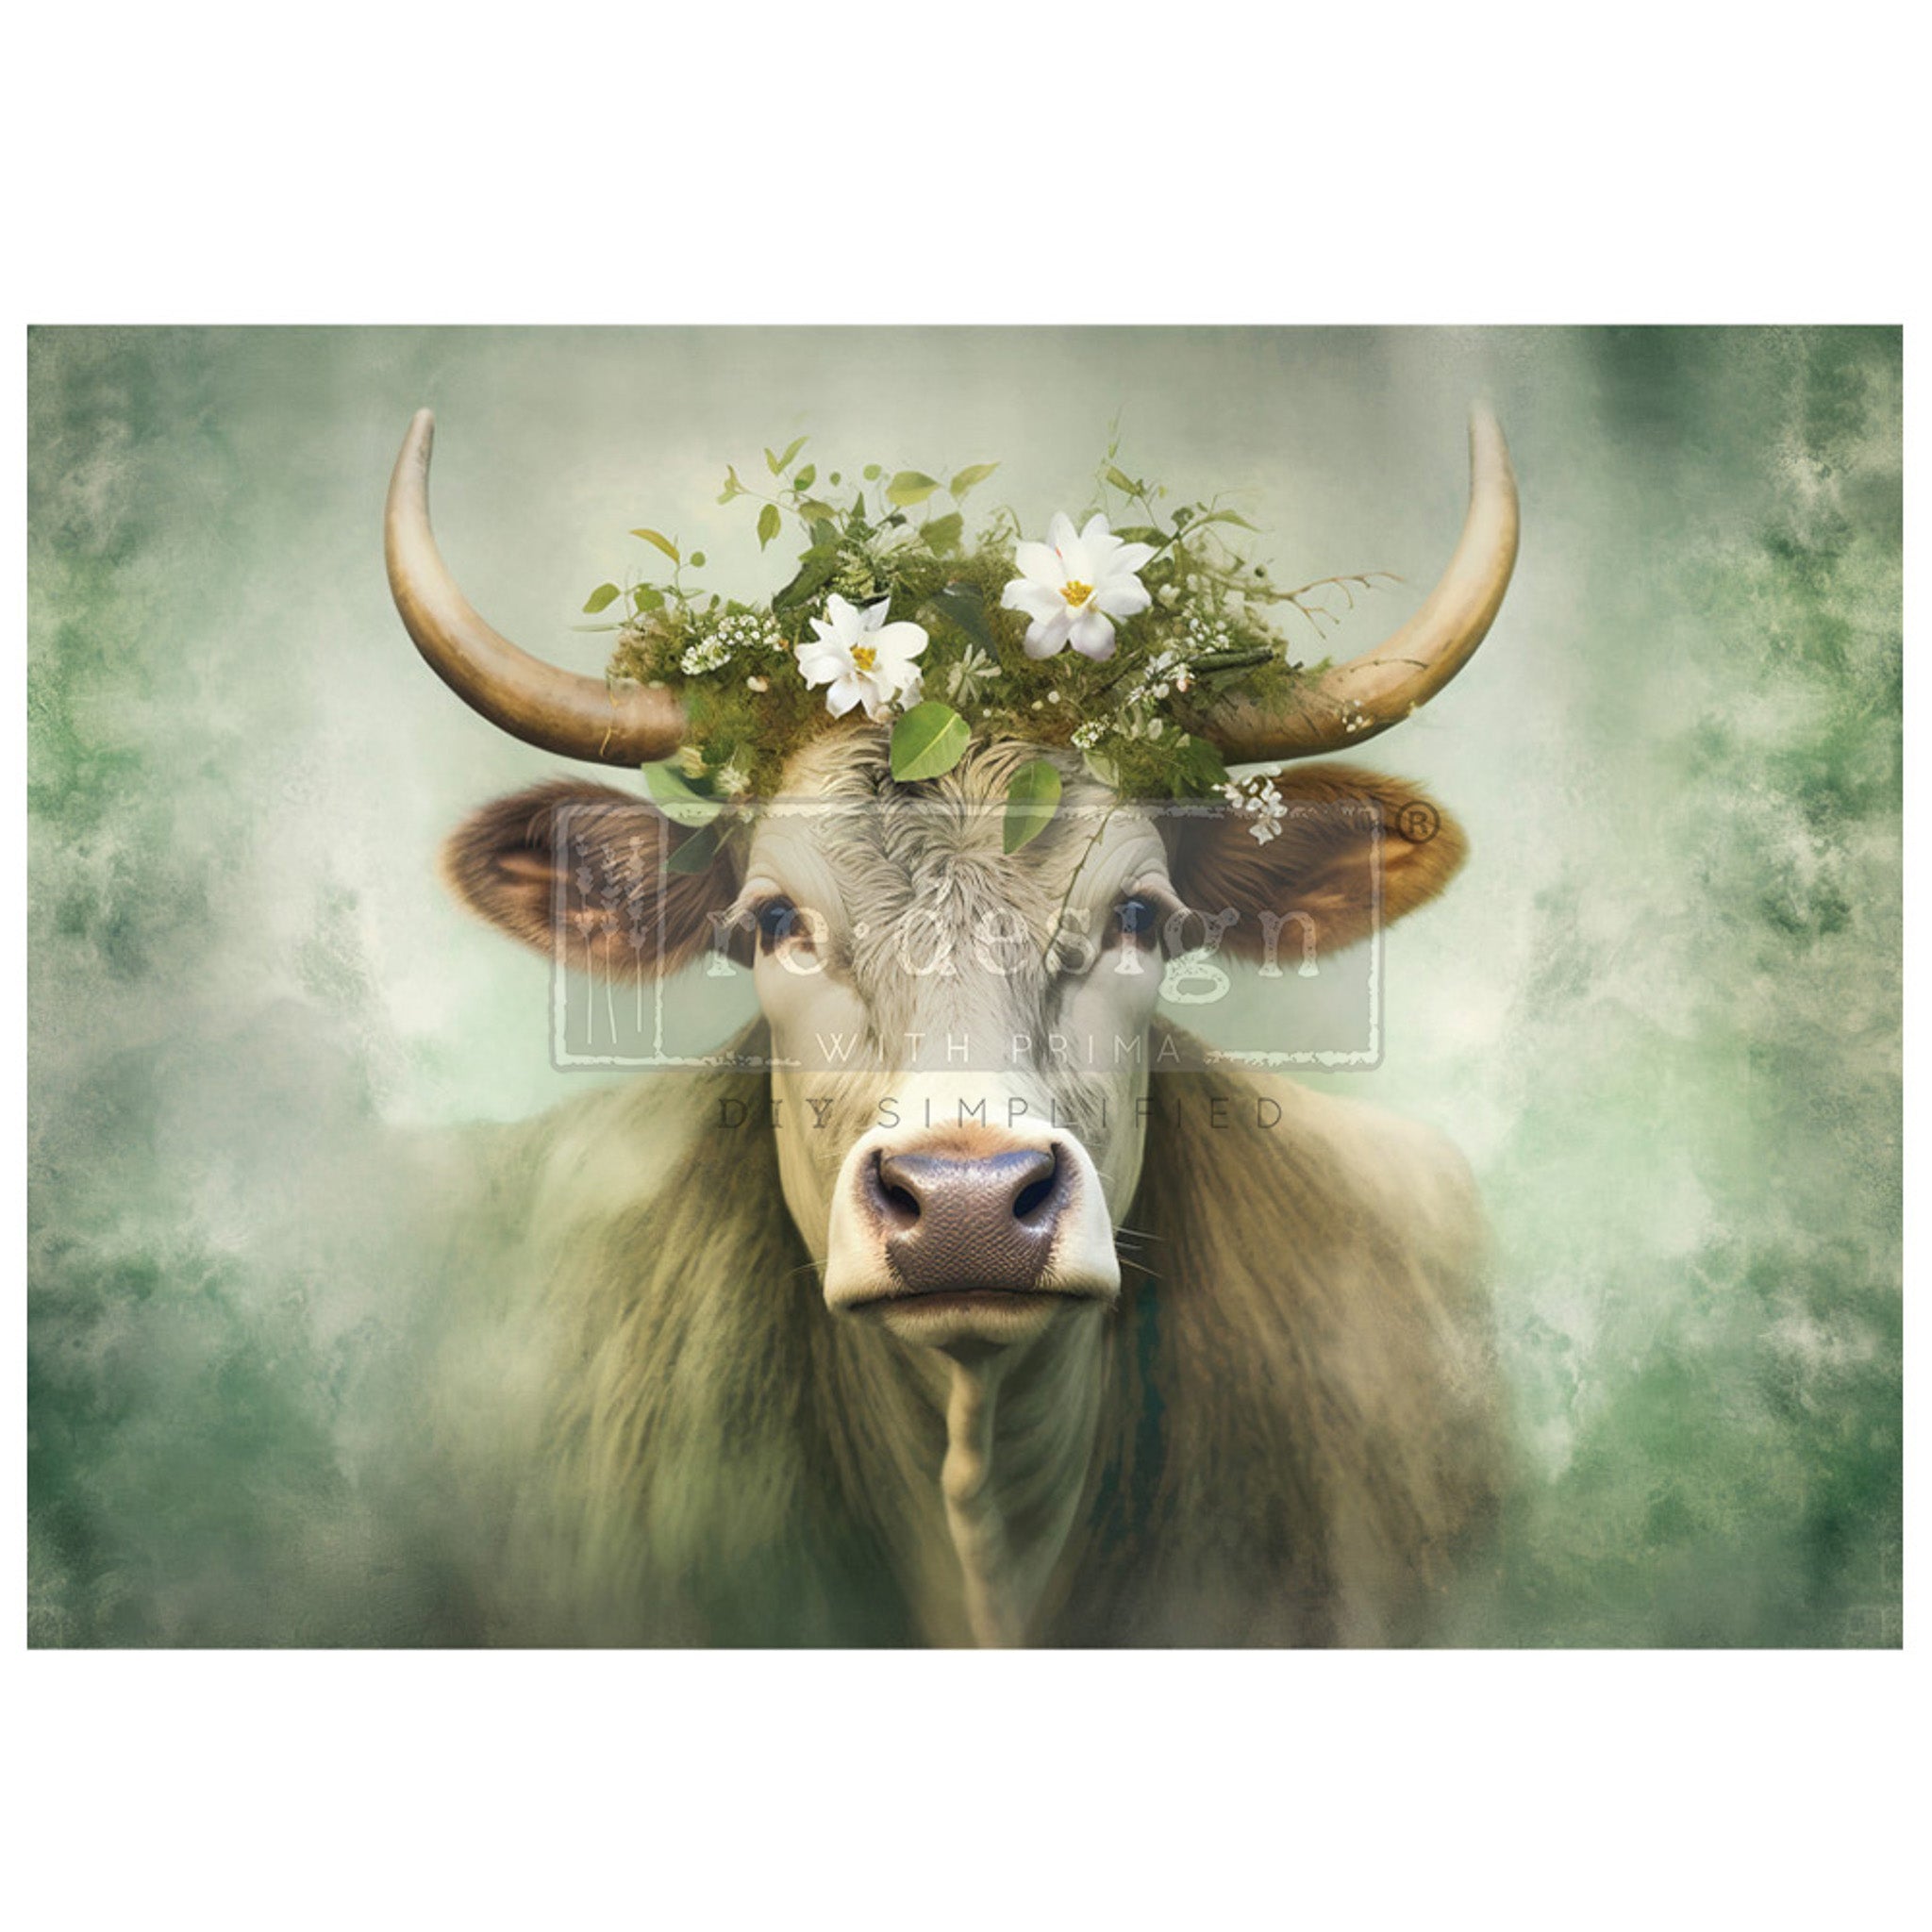 A1 fiber paper featuring the portrait of a cow with horns wearing a floral crown against a soft green background.